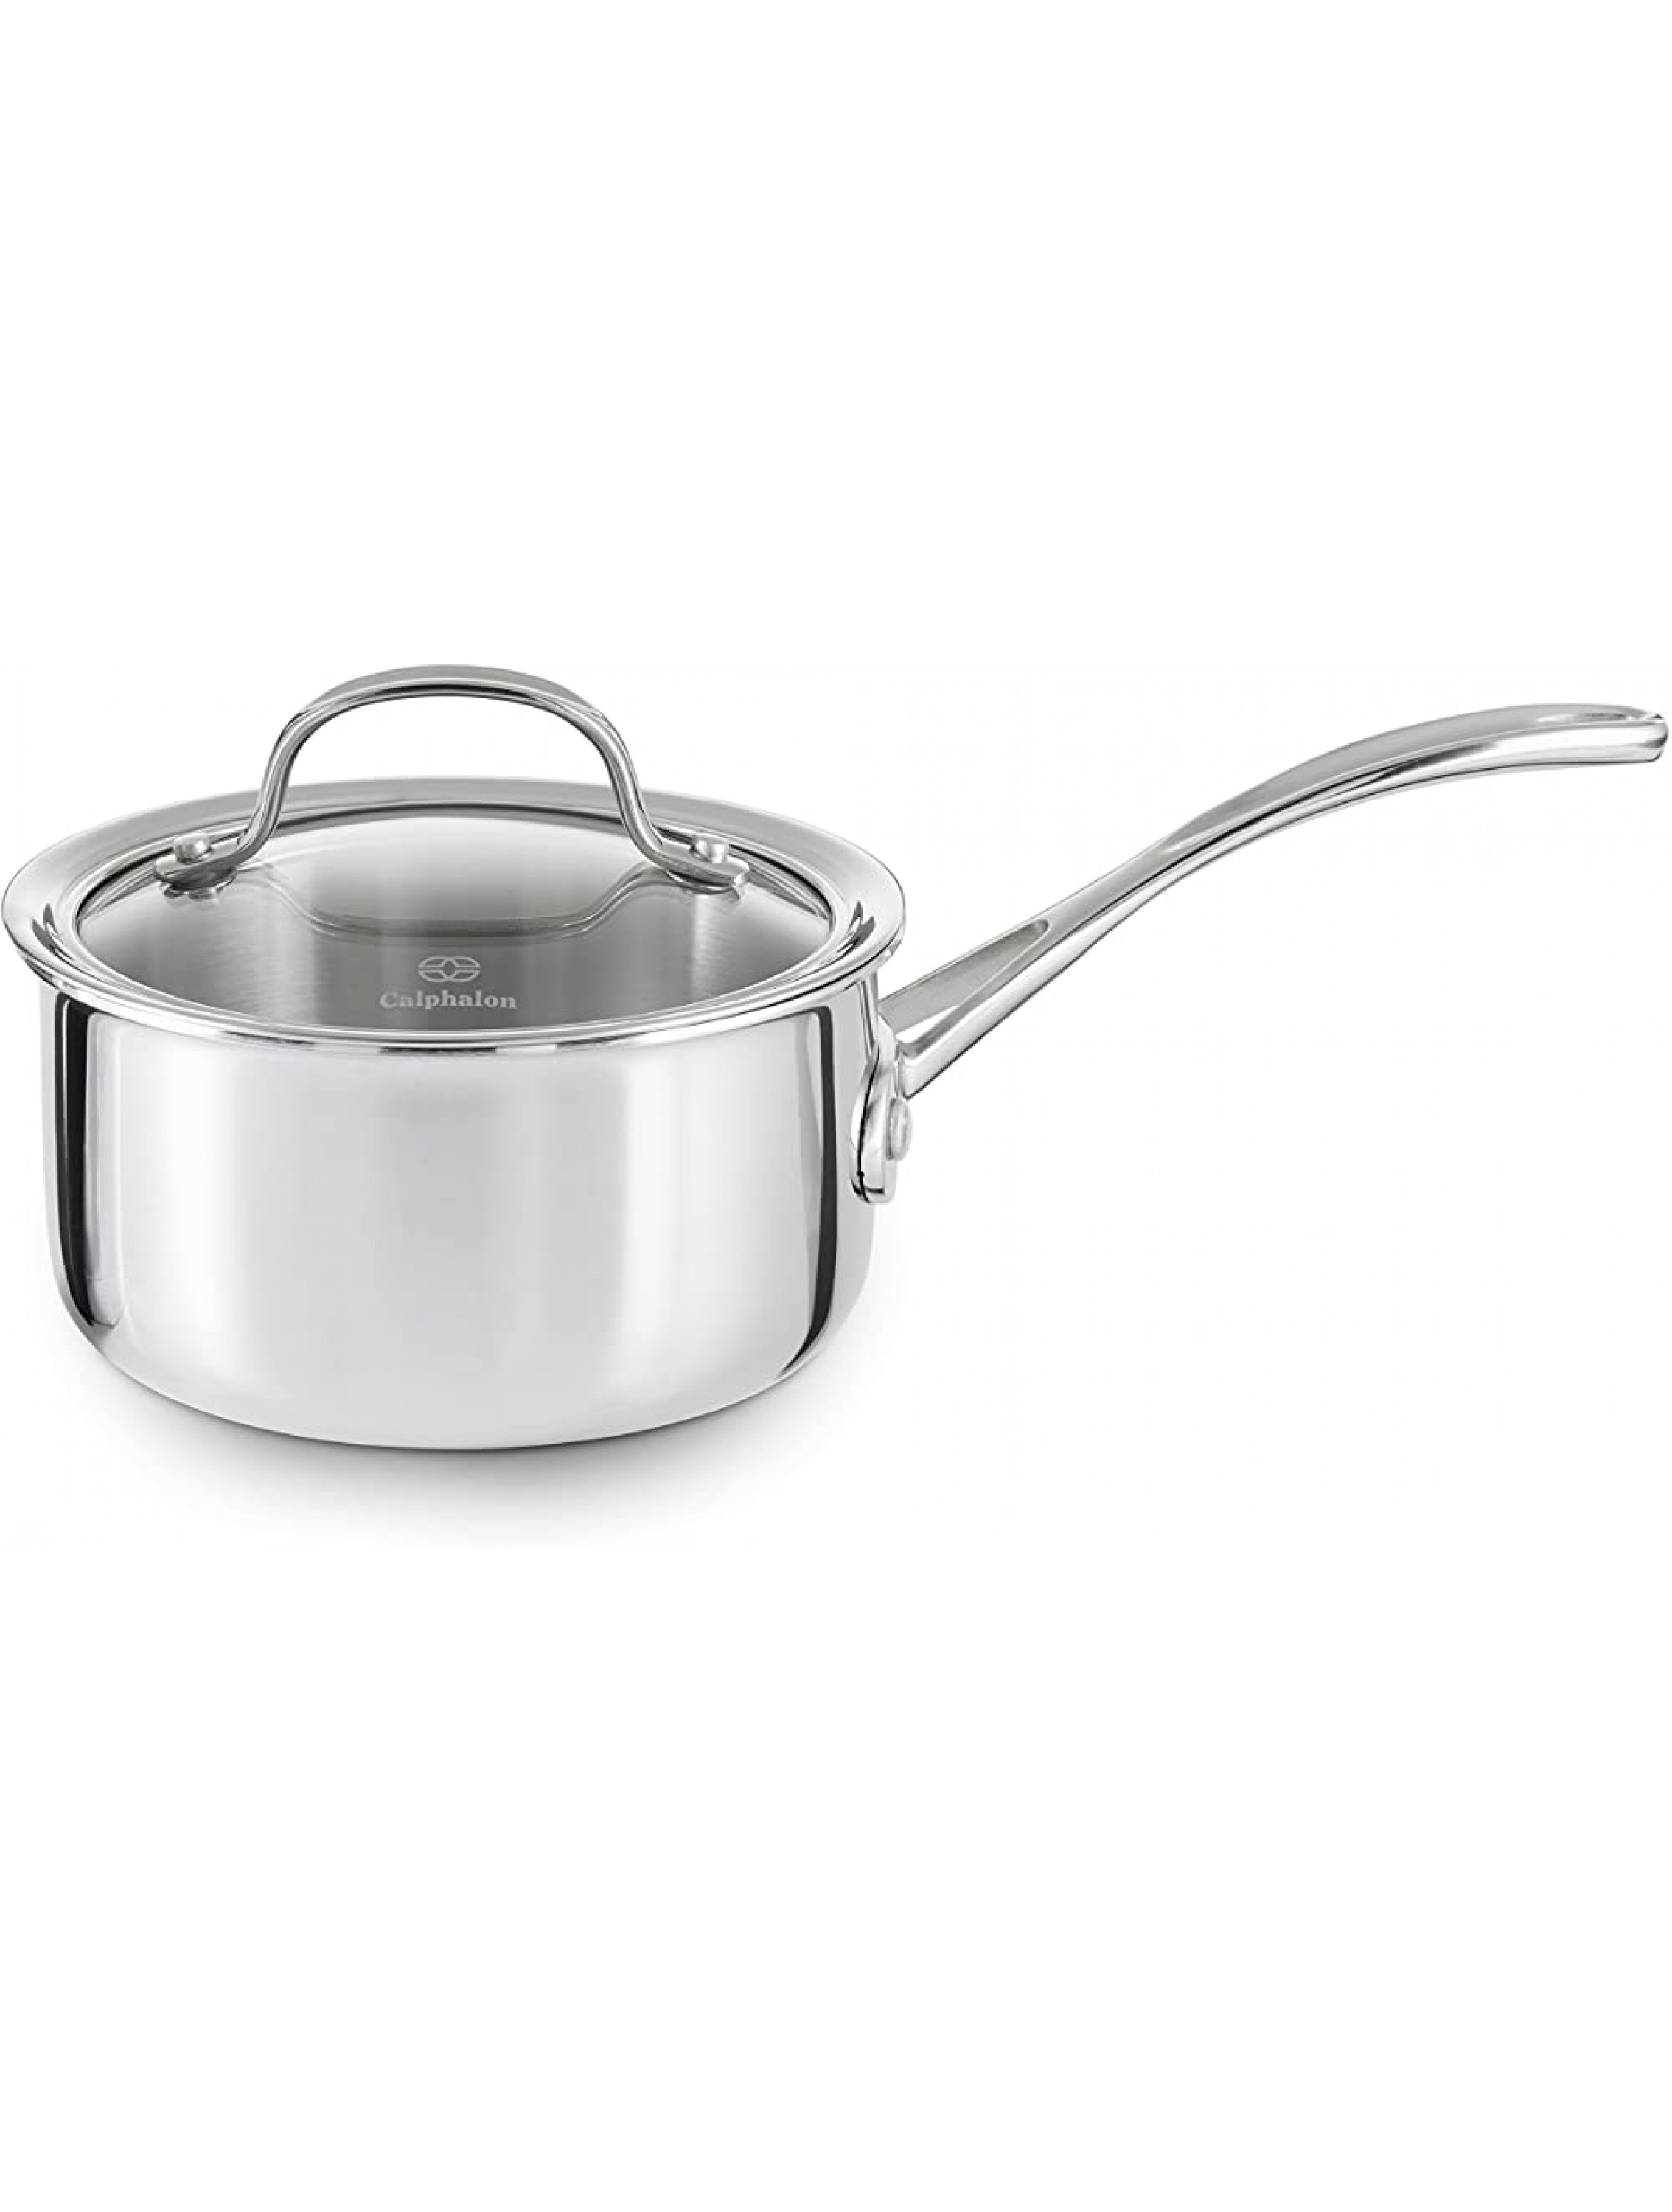 Calphalon Tri-Ply Stainless Steel 1-1 2-Quart Sauce Pan with Cover - BELK766MV